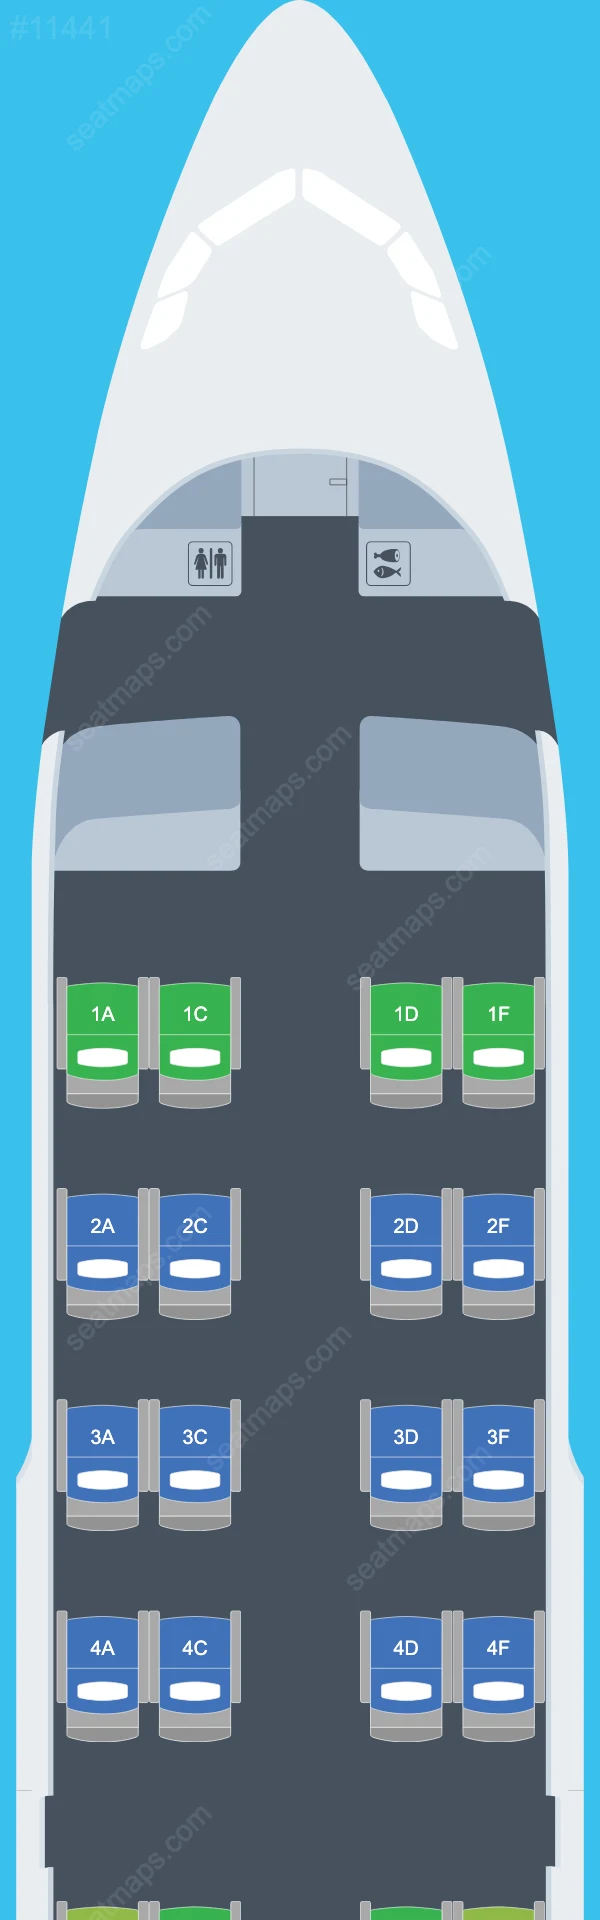 Beond Airbus A319 Seat Maps A319-100